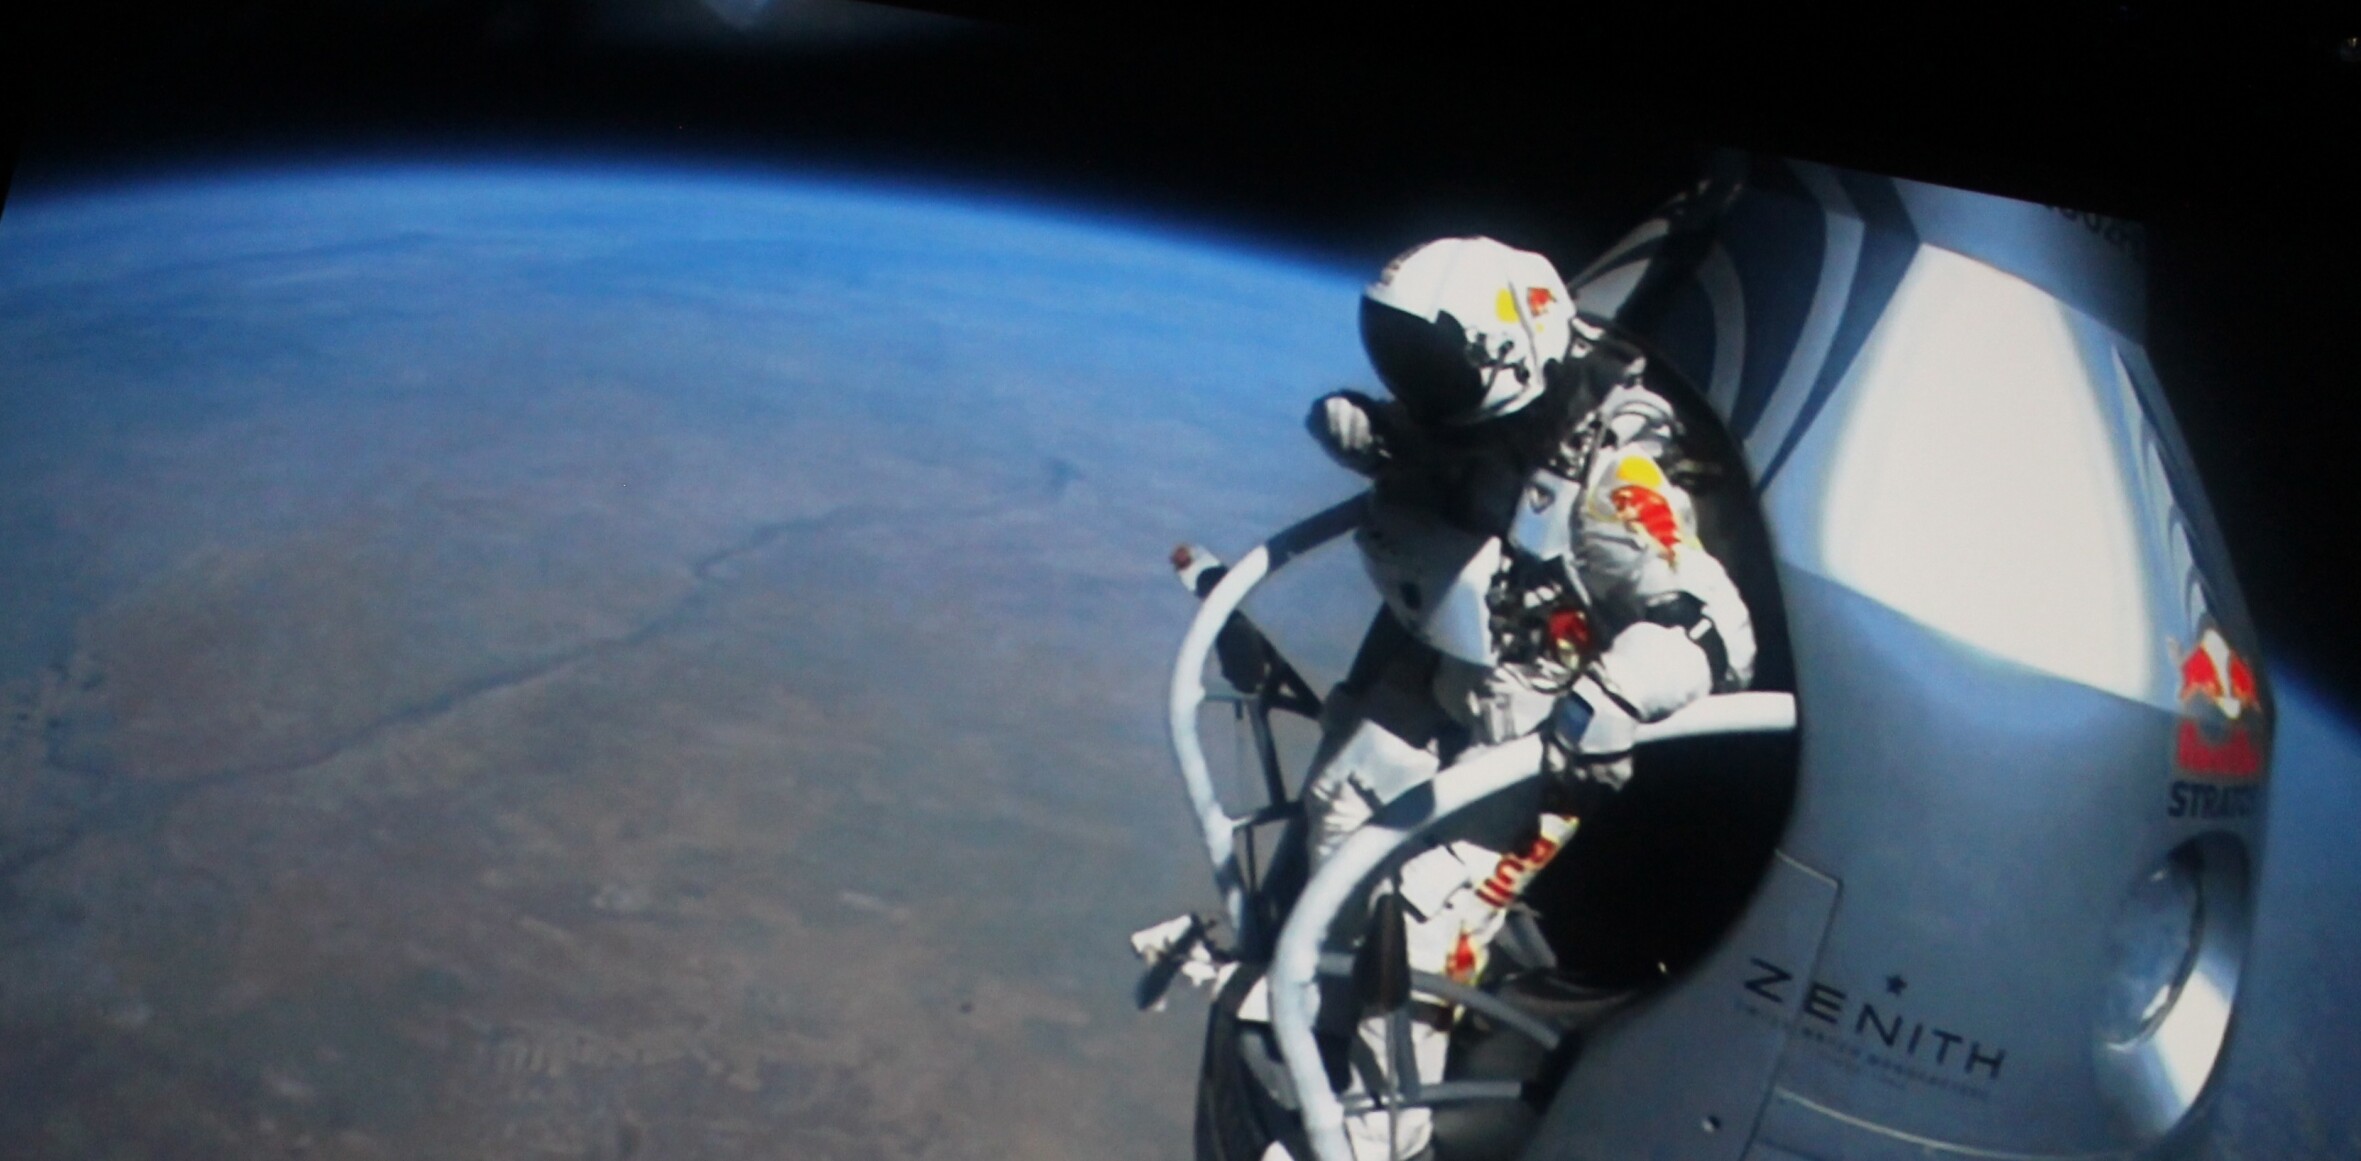 Watch Felix Baumgartner discuss his supersonic freefall from the edge of space [Video]